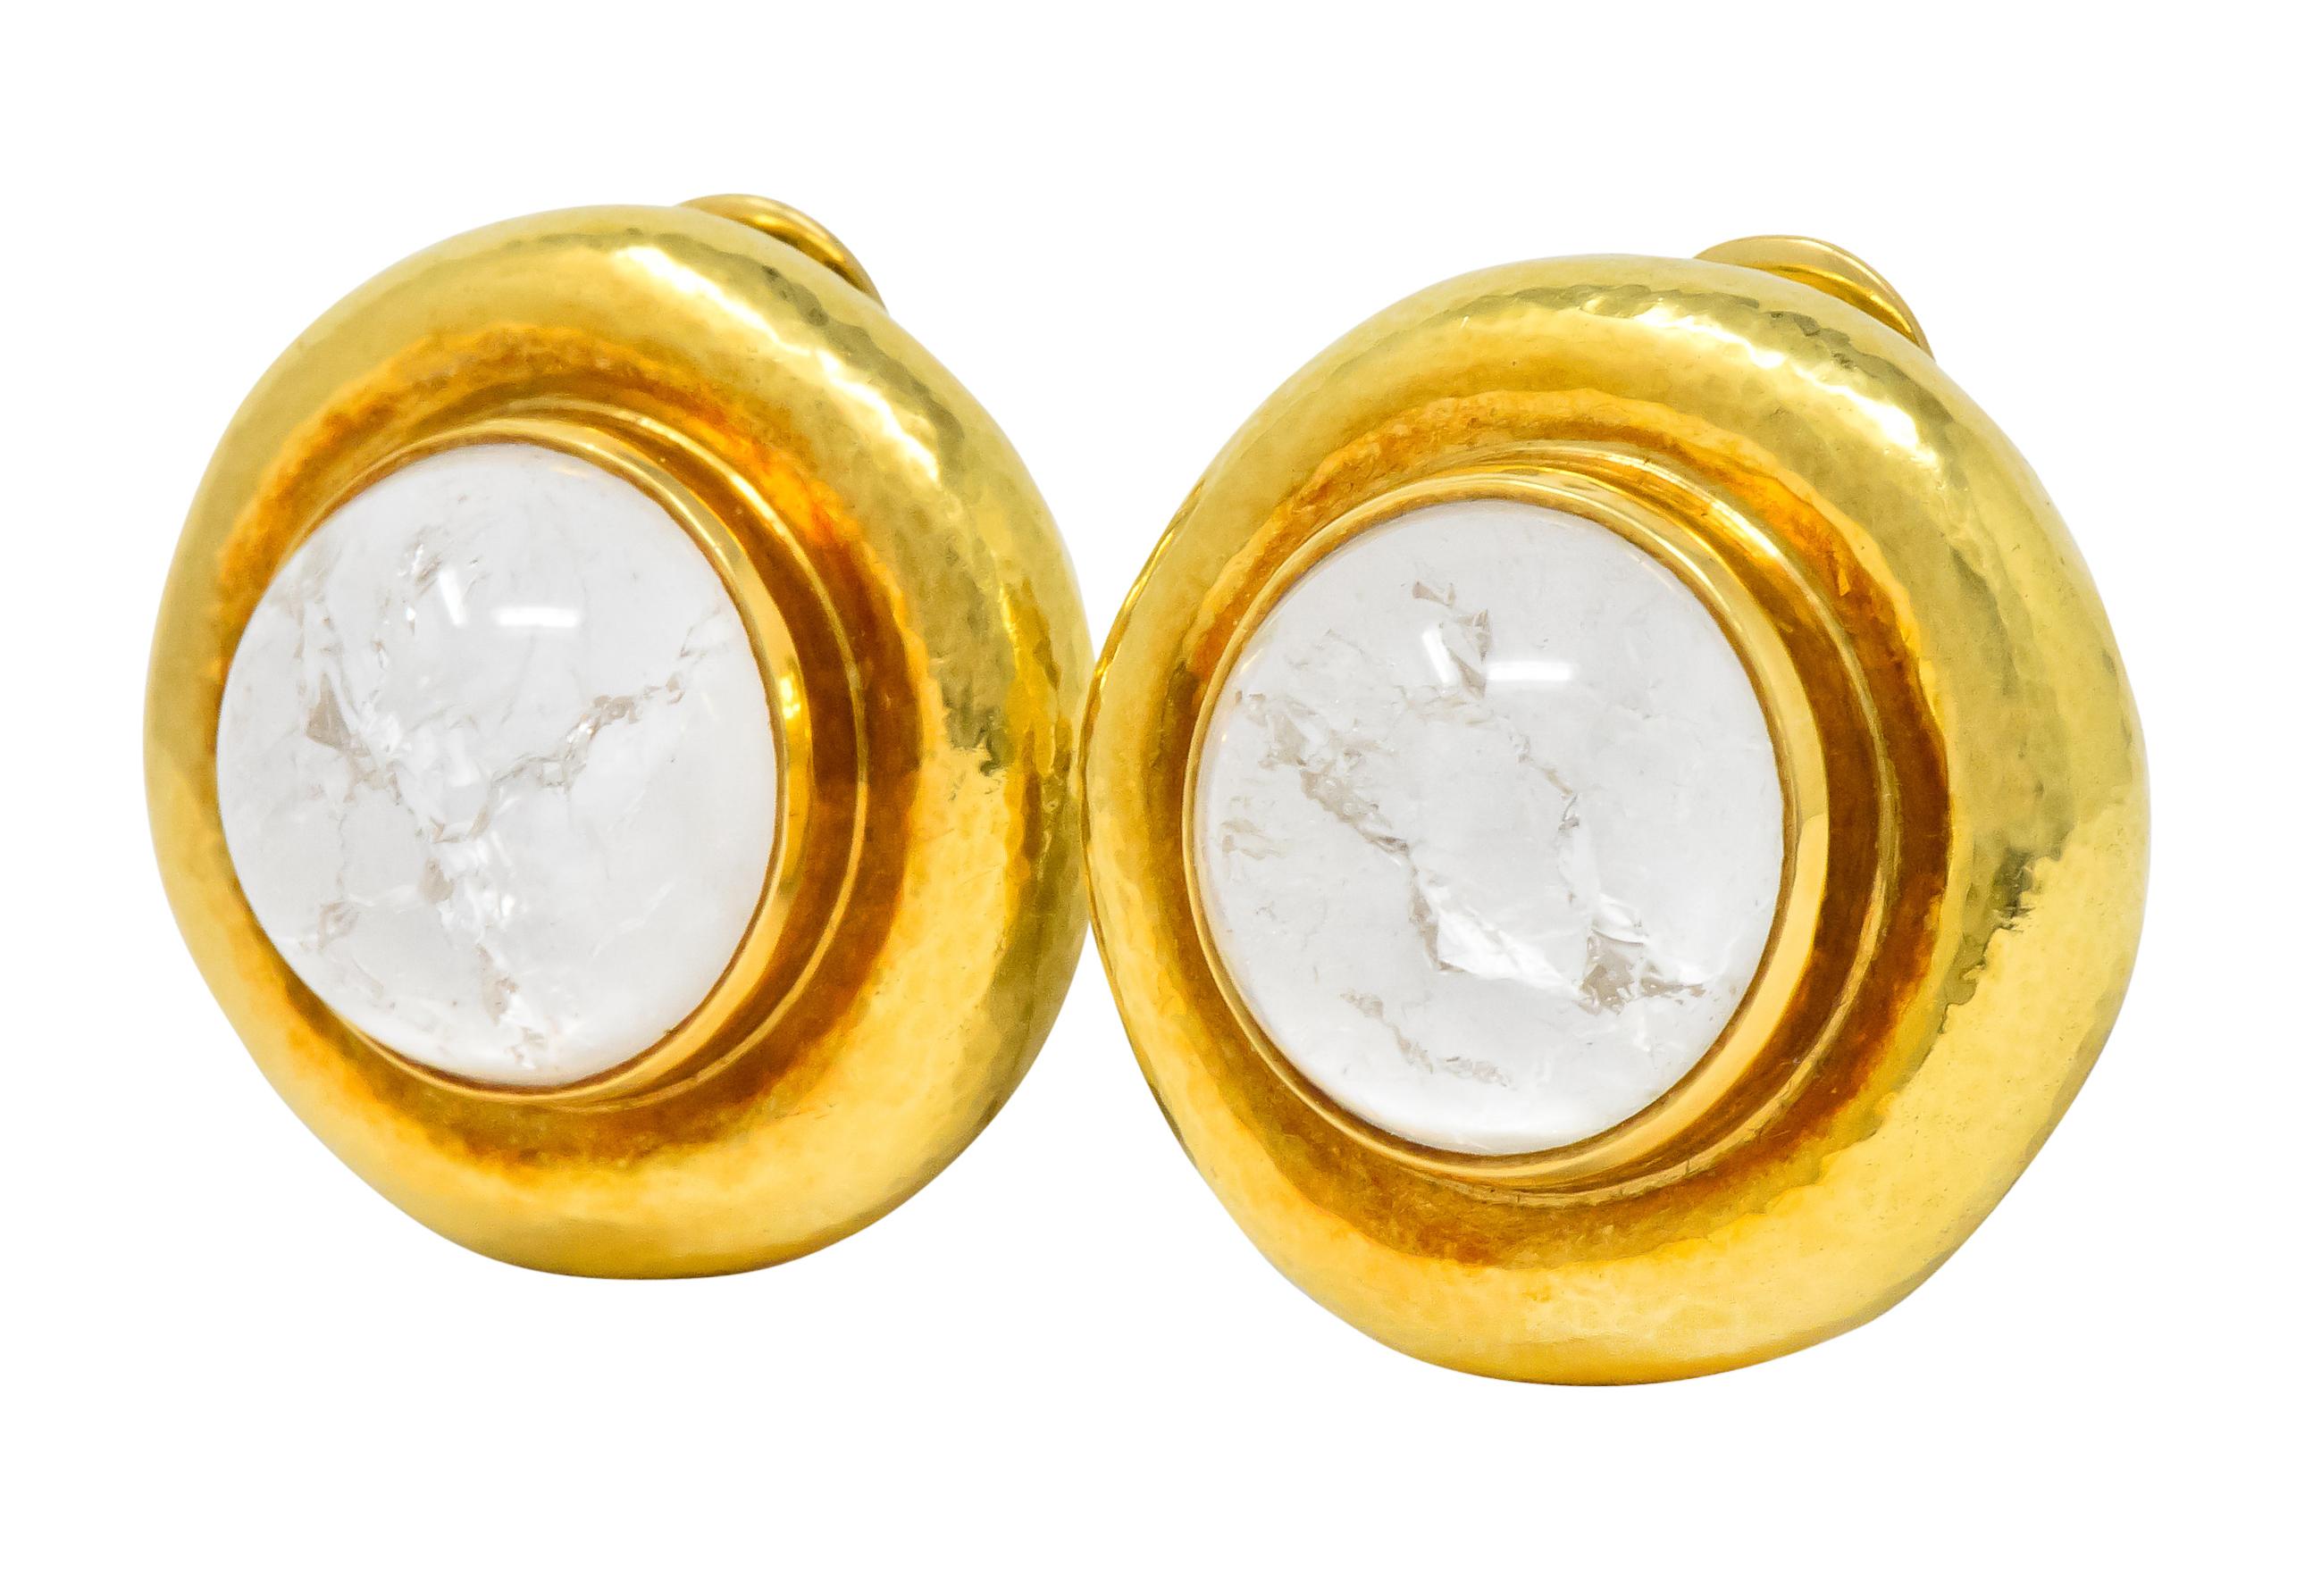 Each centering a high round cabochon rock crystal, with natural crackle or fissures, measuring approximately 17.0 mm

Backed by white mother of pearl

Bezel set in high polished gold with a rounded hammered gold surround 

Hinged clip backs

Signed